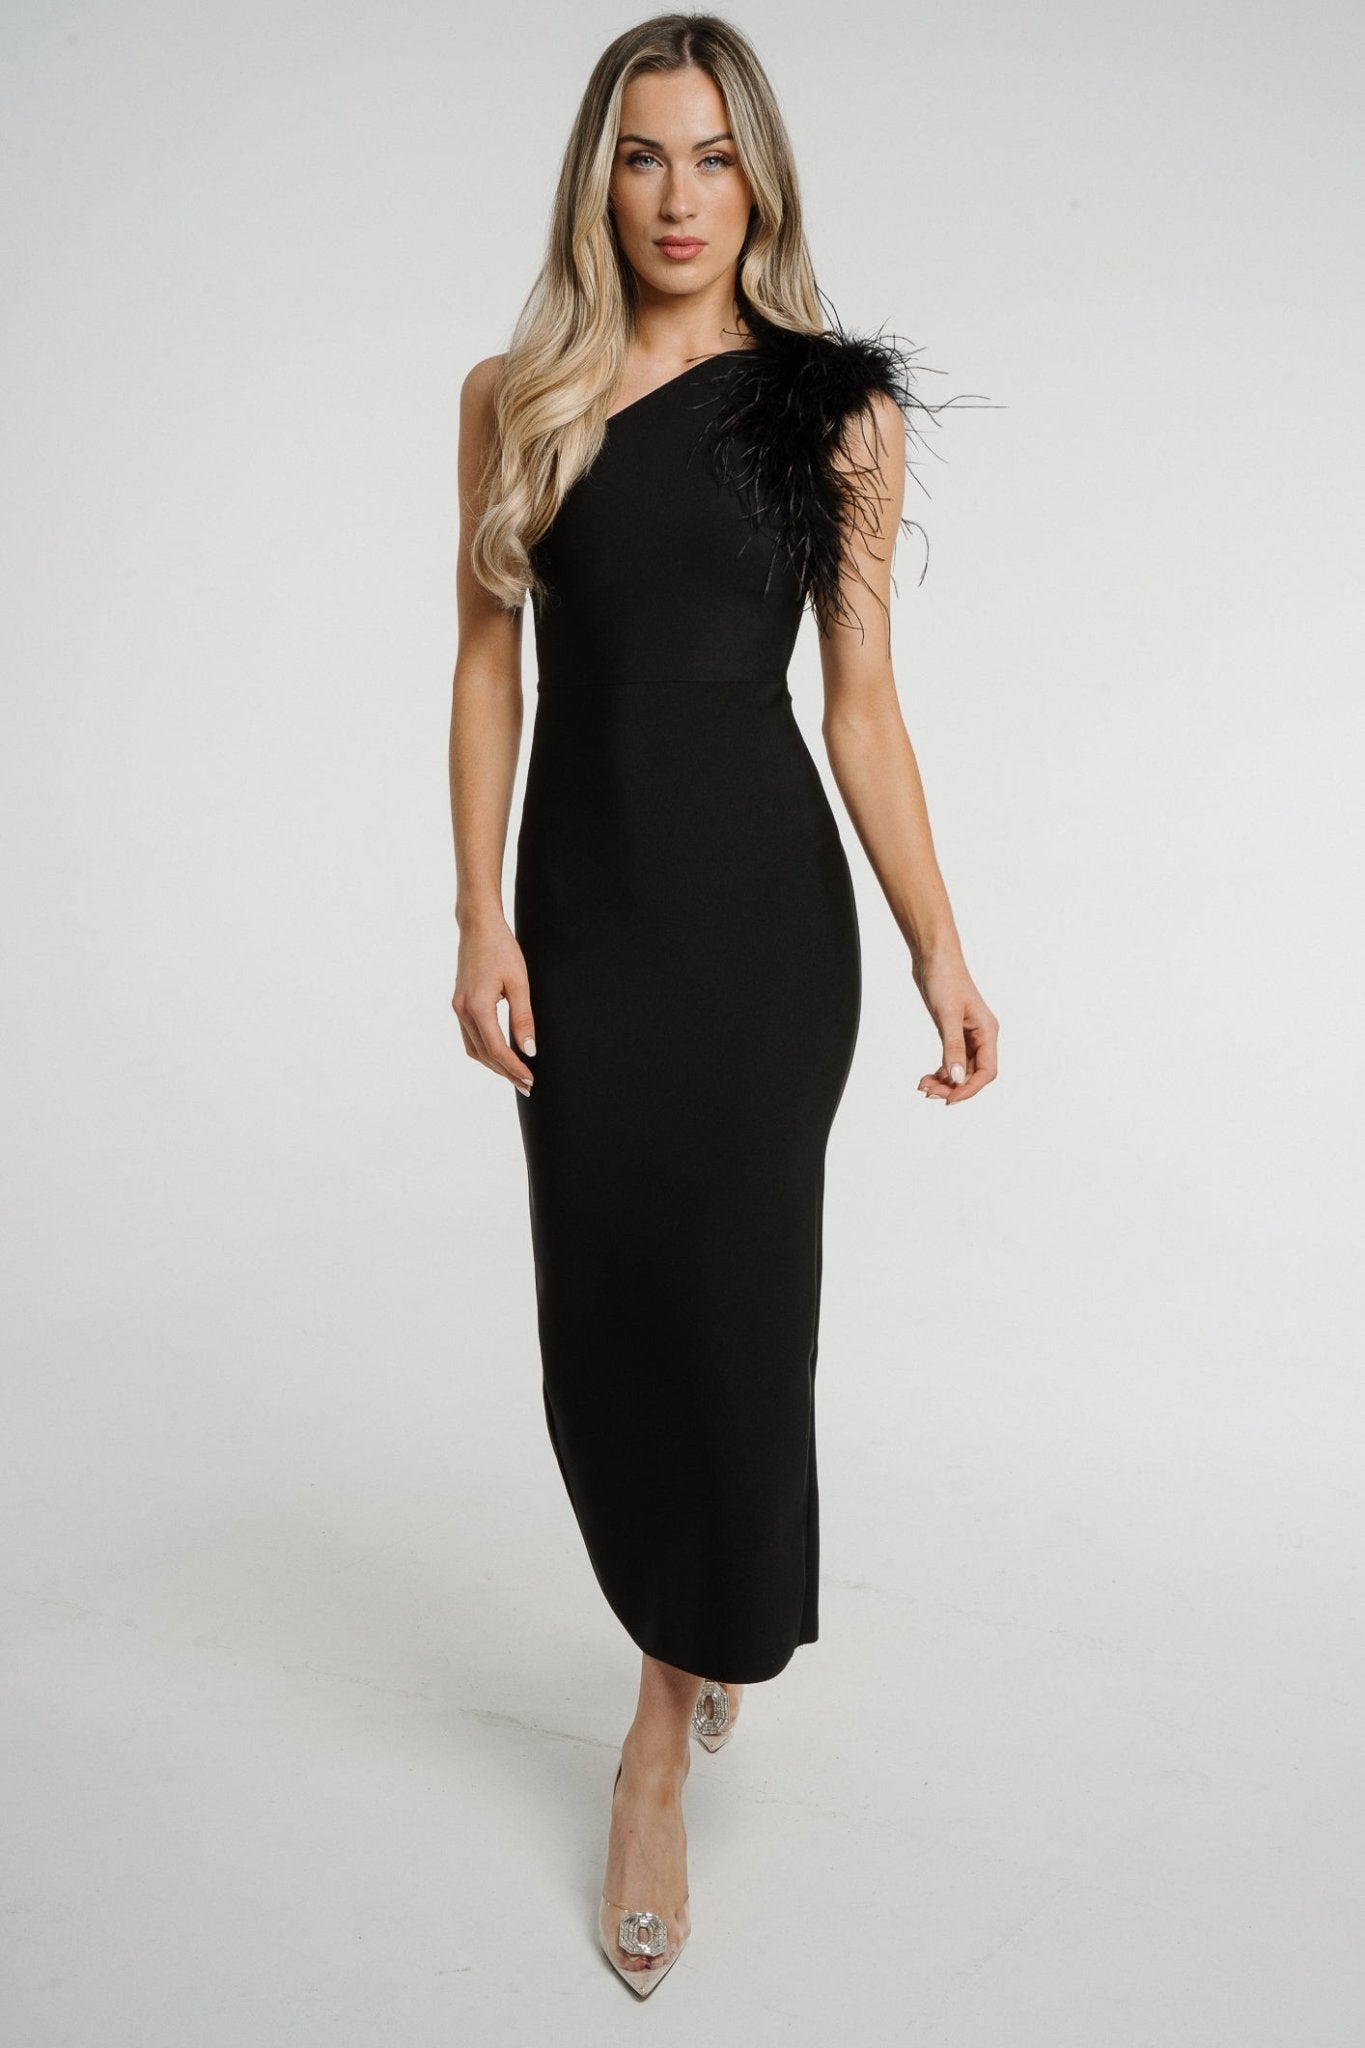 Holly Feather One Shoulder Dress In Black - The Walk in Wardrobe